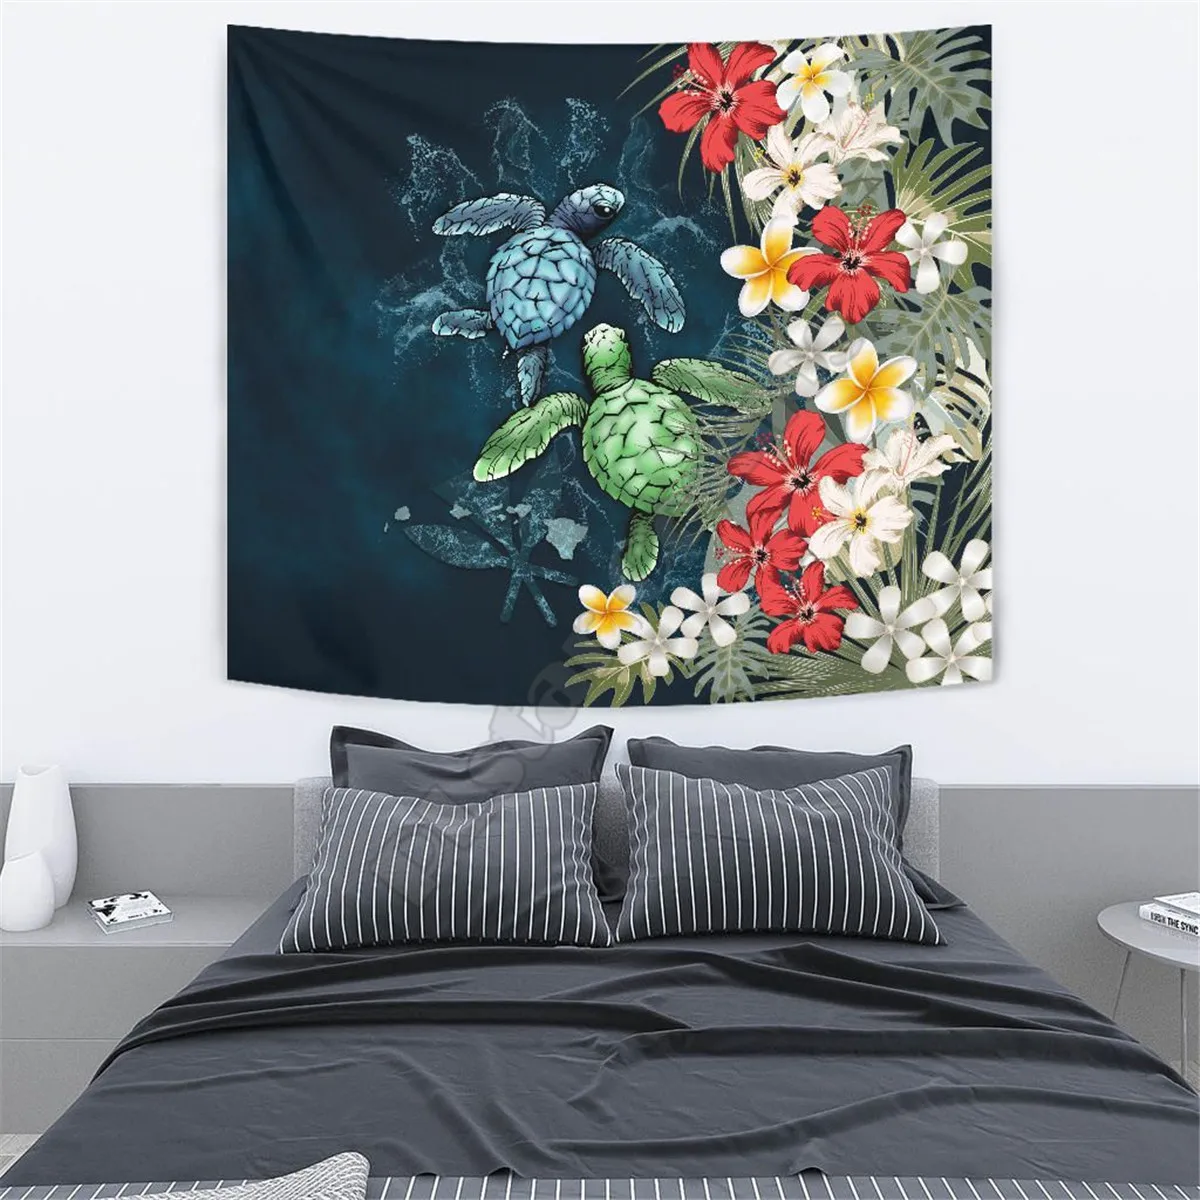 

Kanaka Maoli Tapestry Sea Turtle Tropical Hibiscus and Plumeria 3D Printing Tapestrying Rectangular Home Decor Wall Hanging